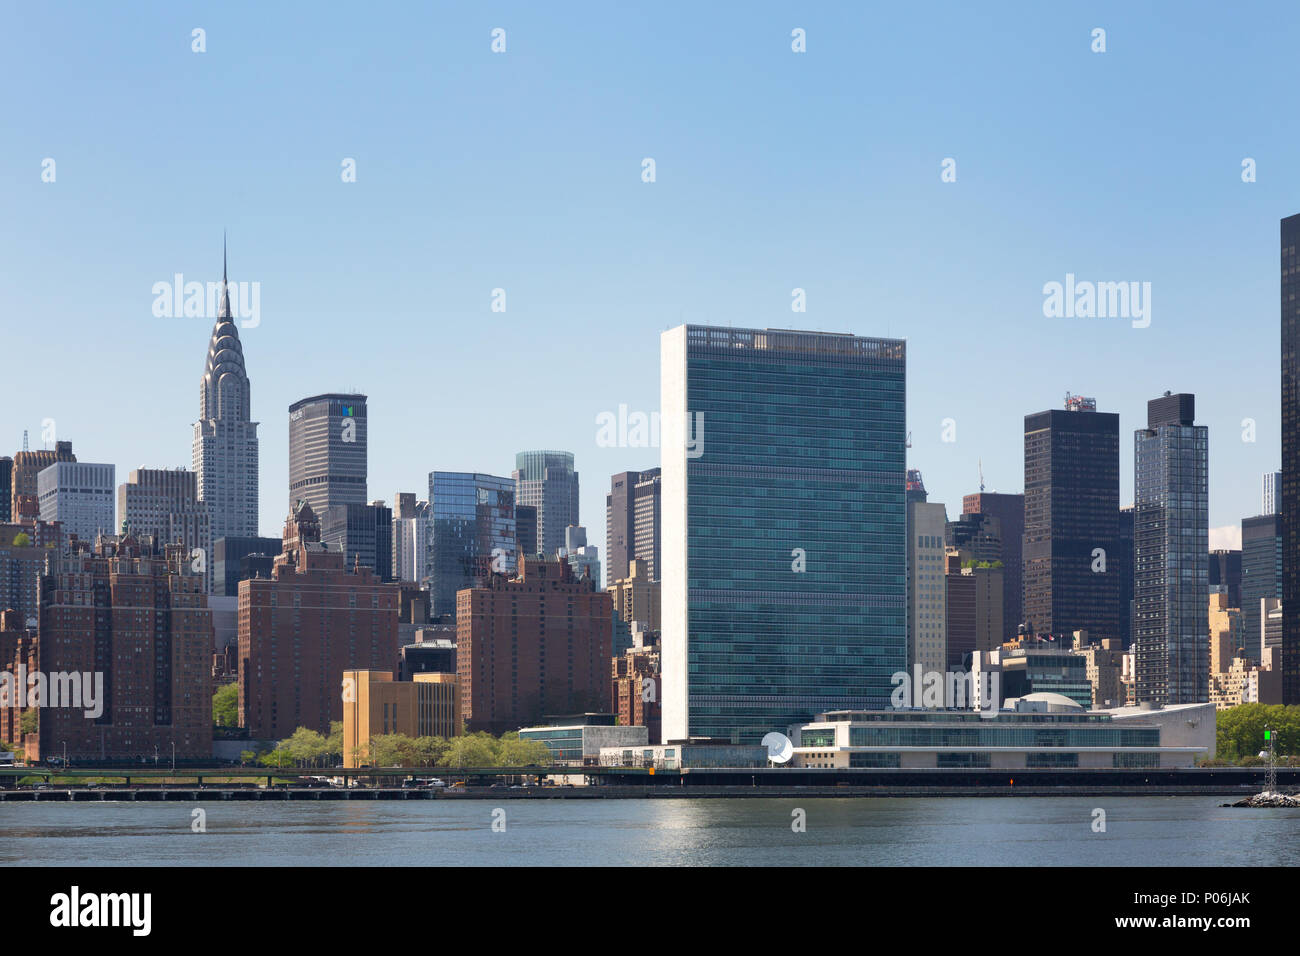 The United Nations Headquarters building, East River, New York city USA Stock Photo